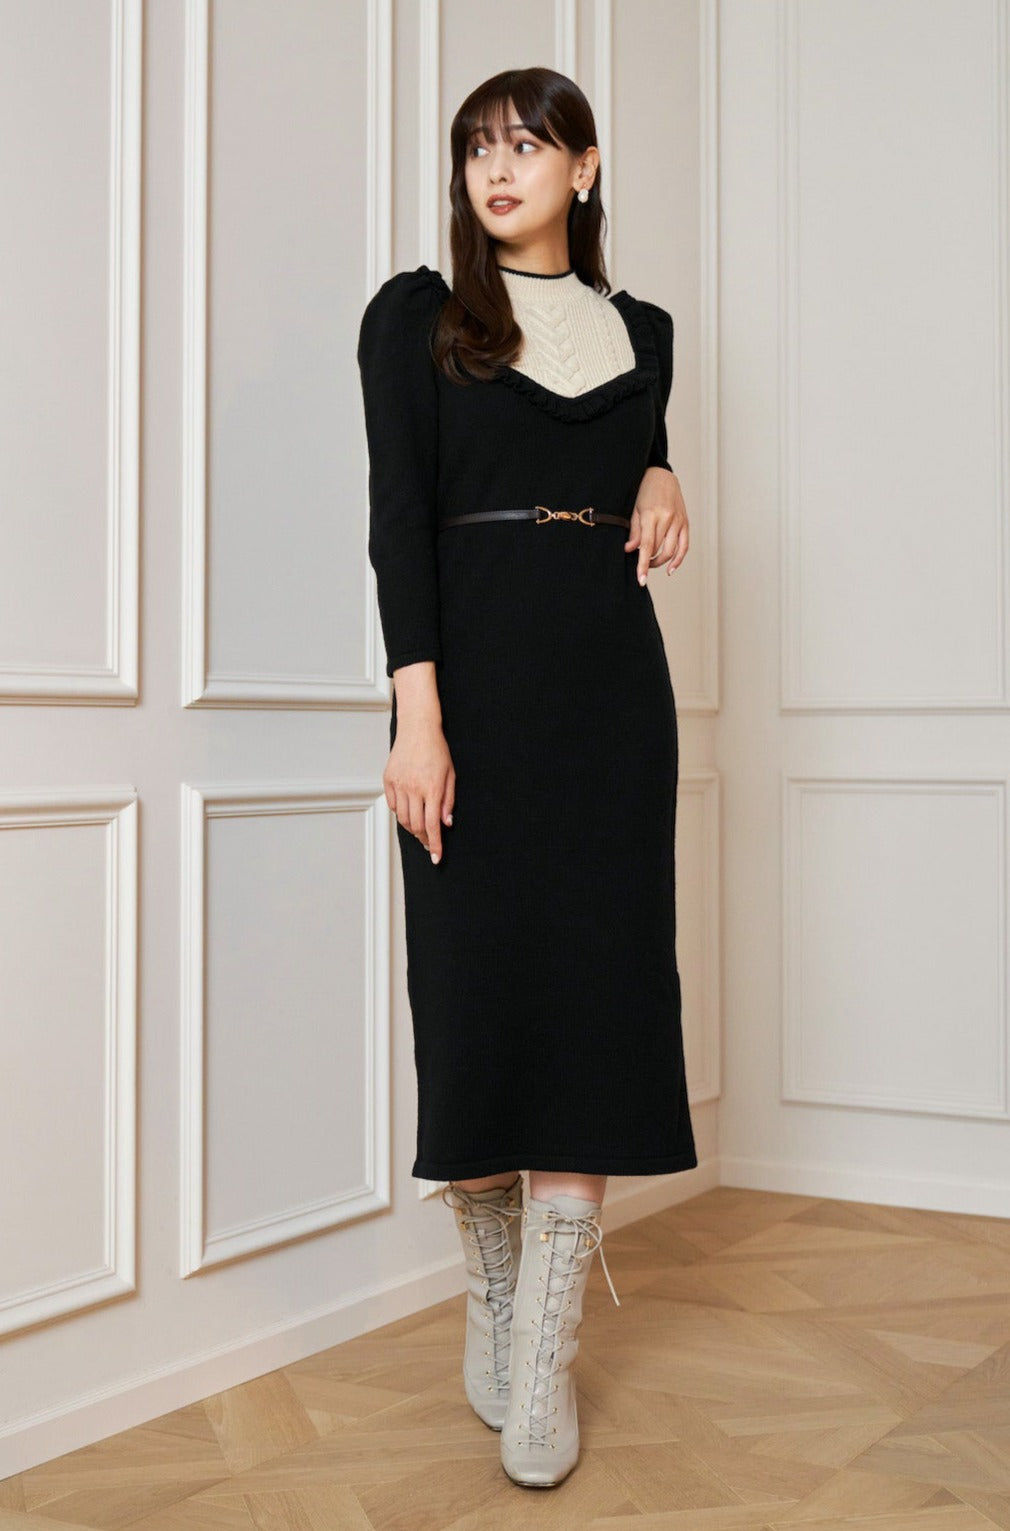 Belted Ruffle Cable-Knit Dress | angeloawards.com